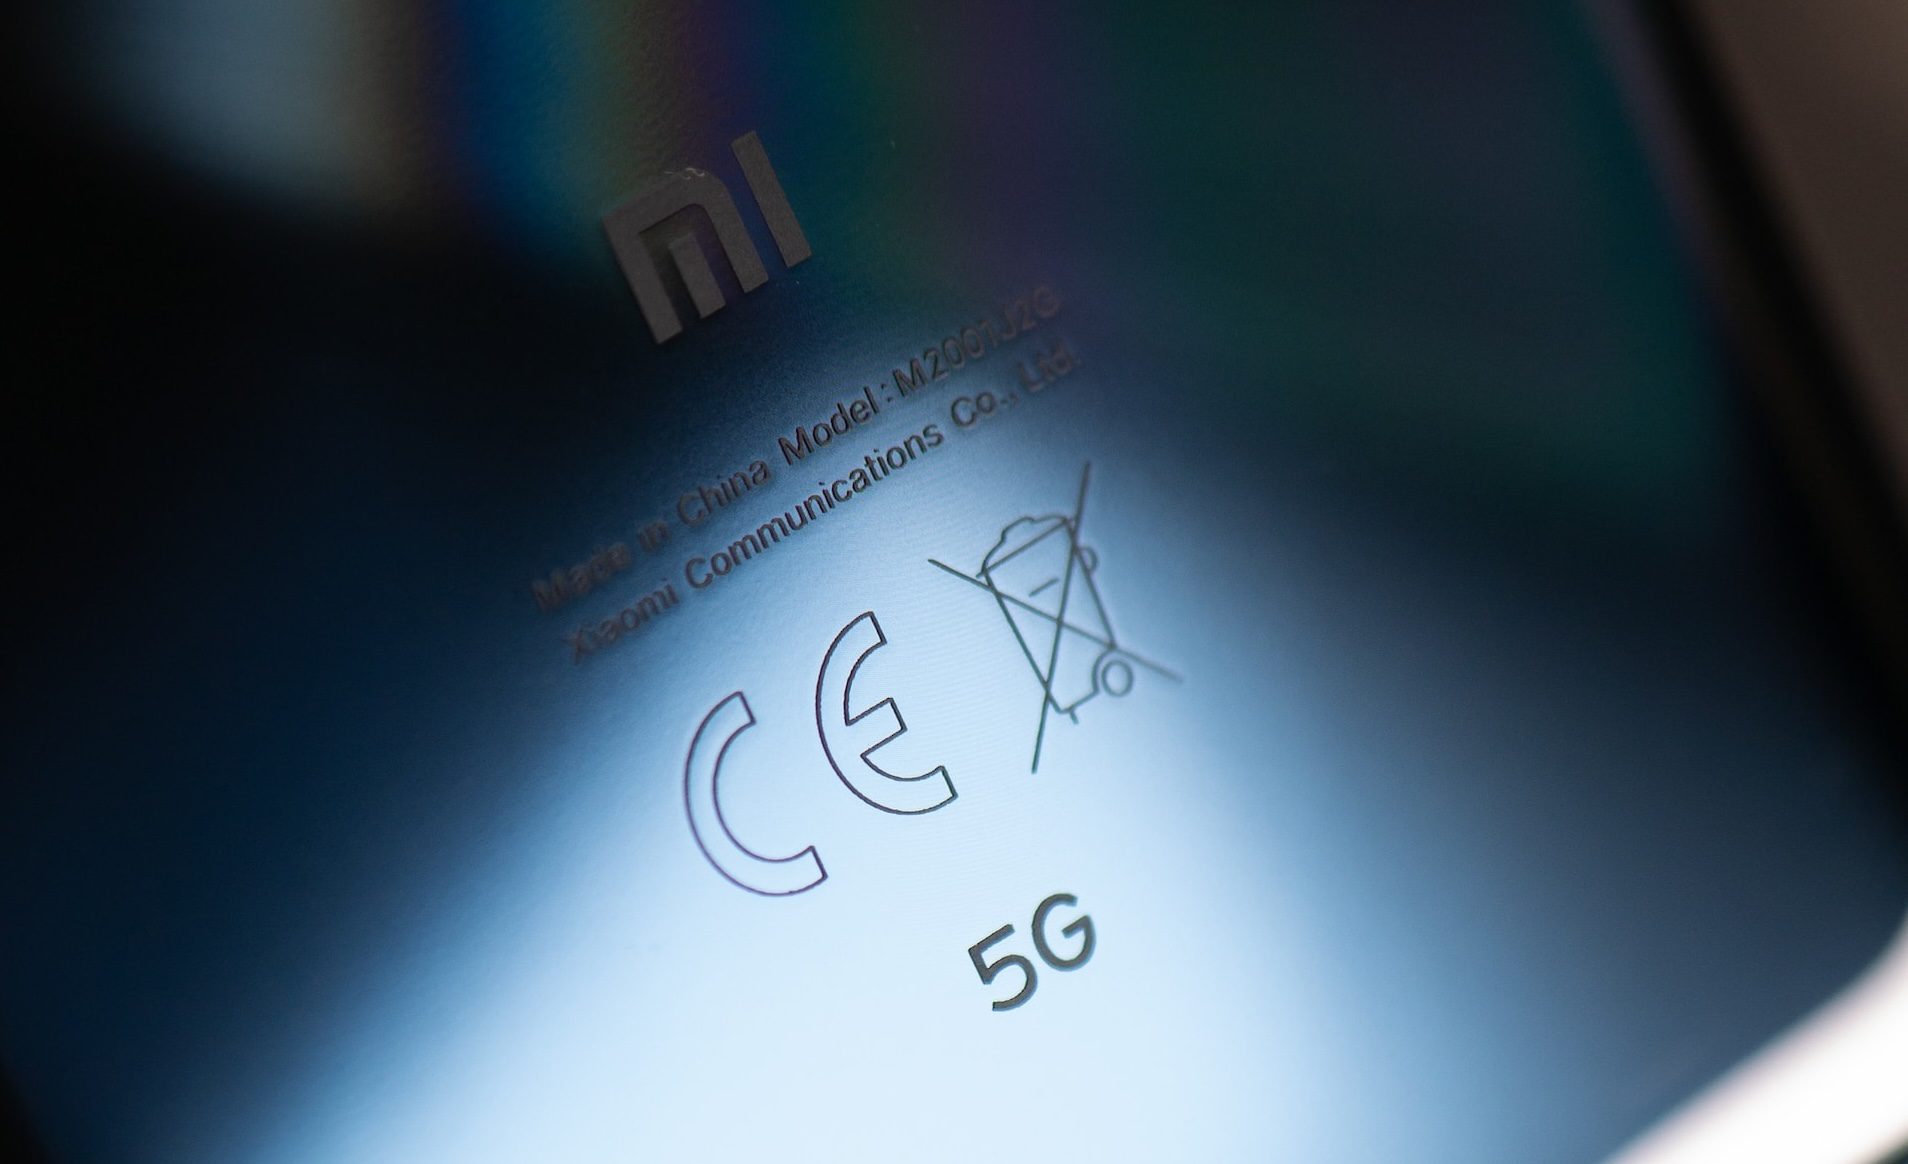 5G Inscription on the back of a smartphone